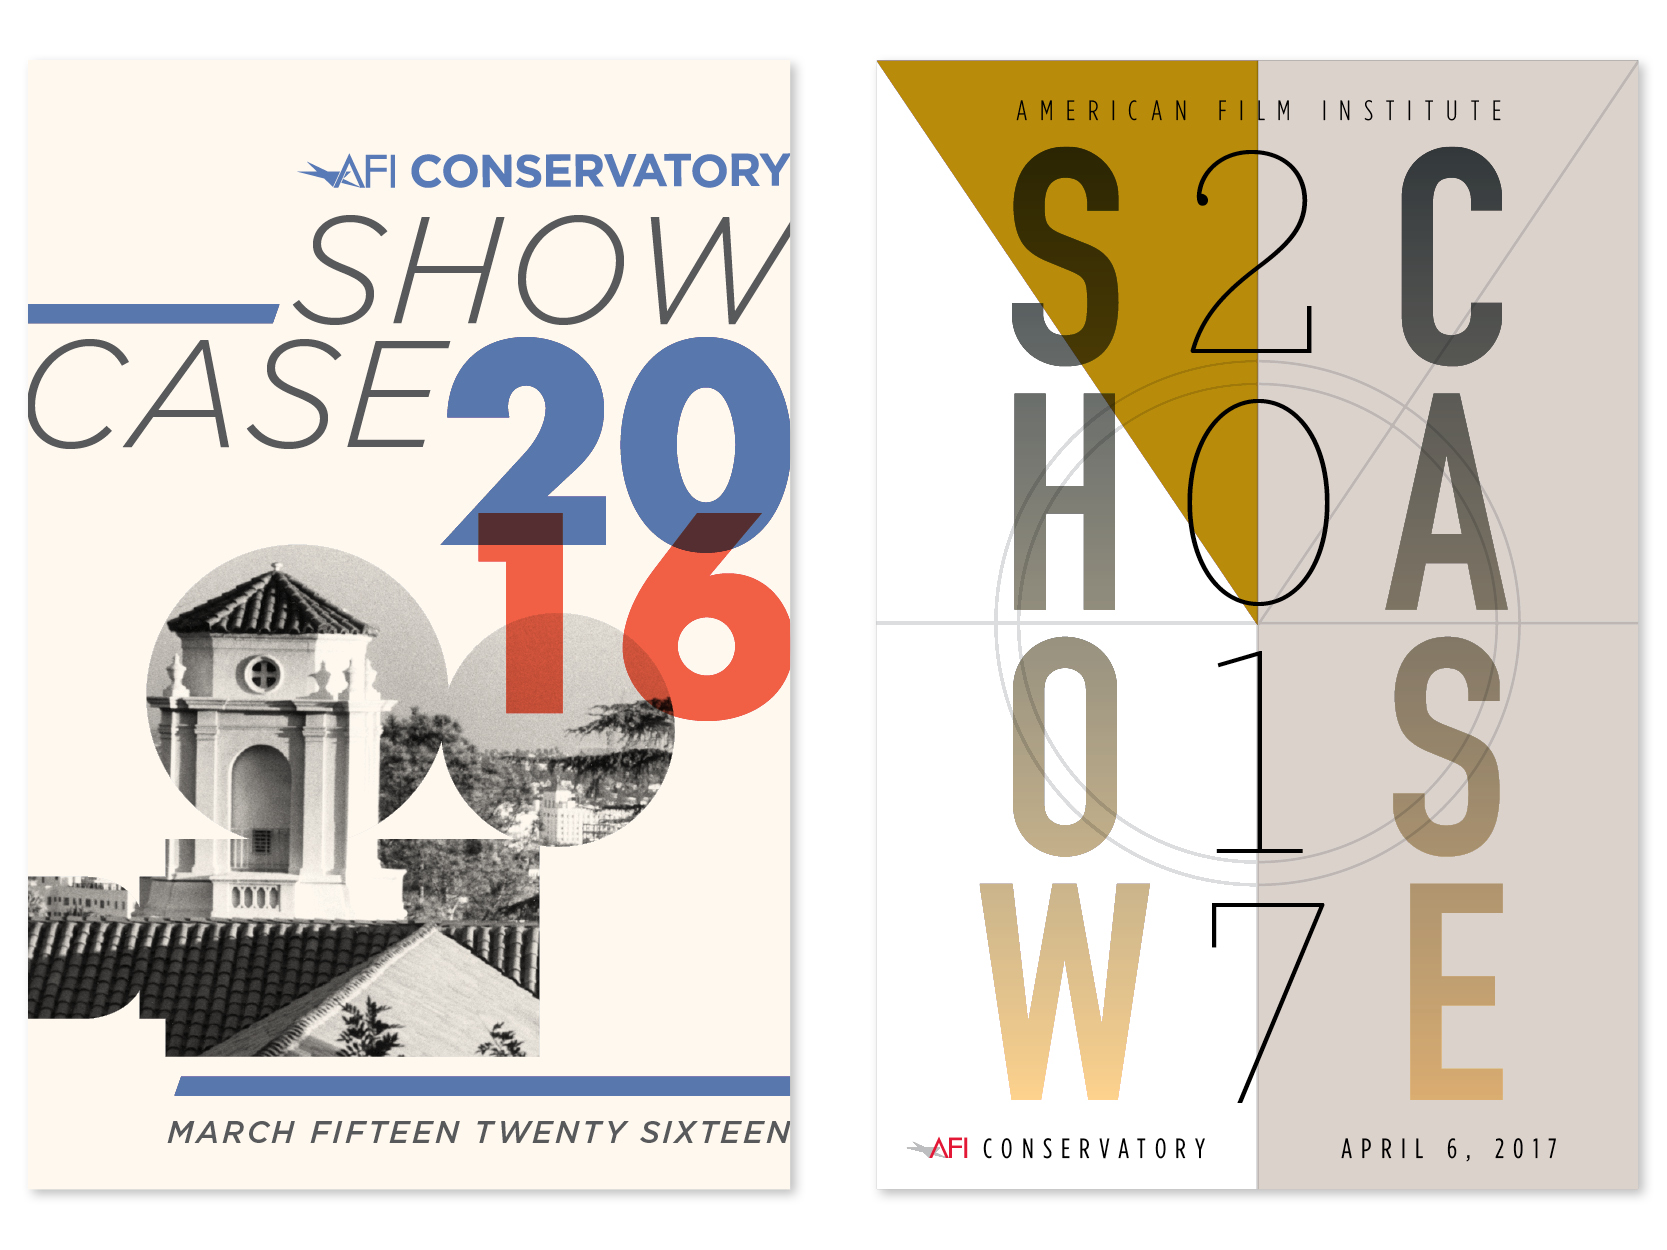  Key art concept designs for the American Film Institute's Conservatory Showcase 